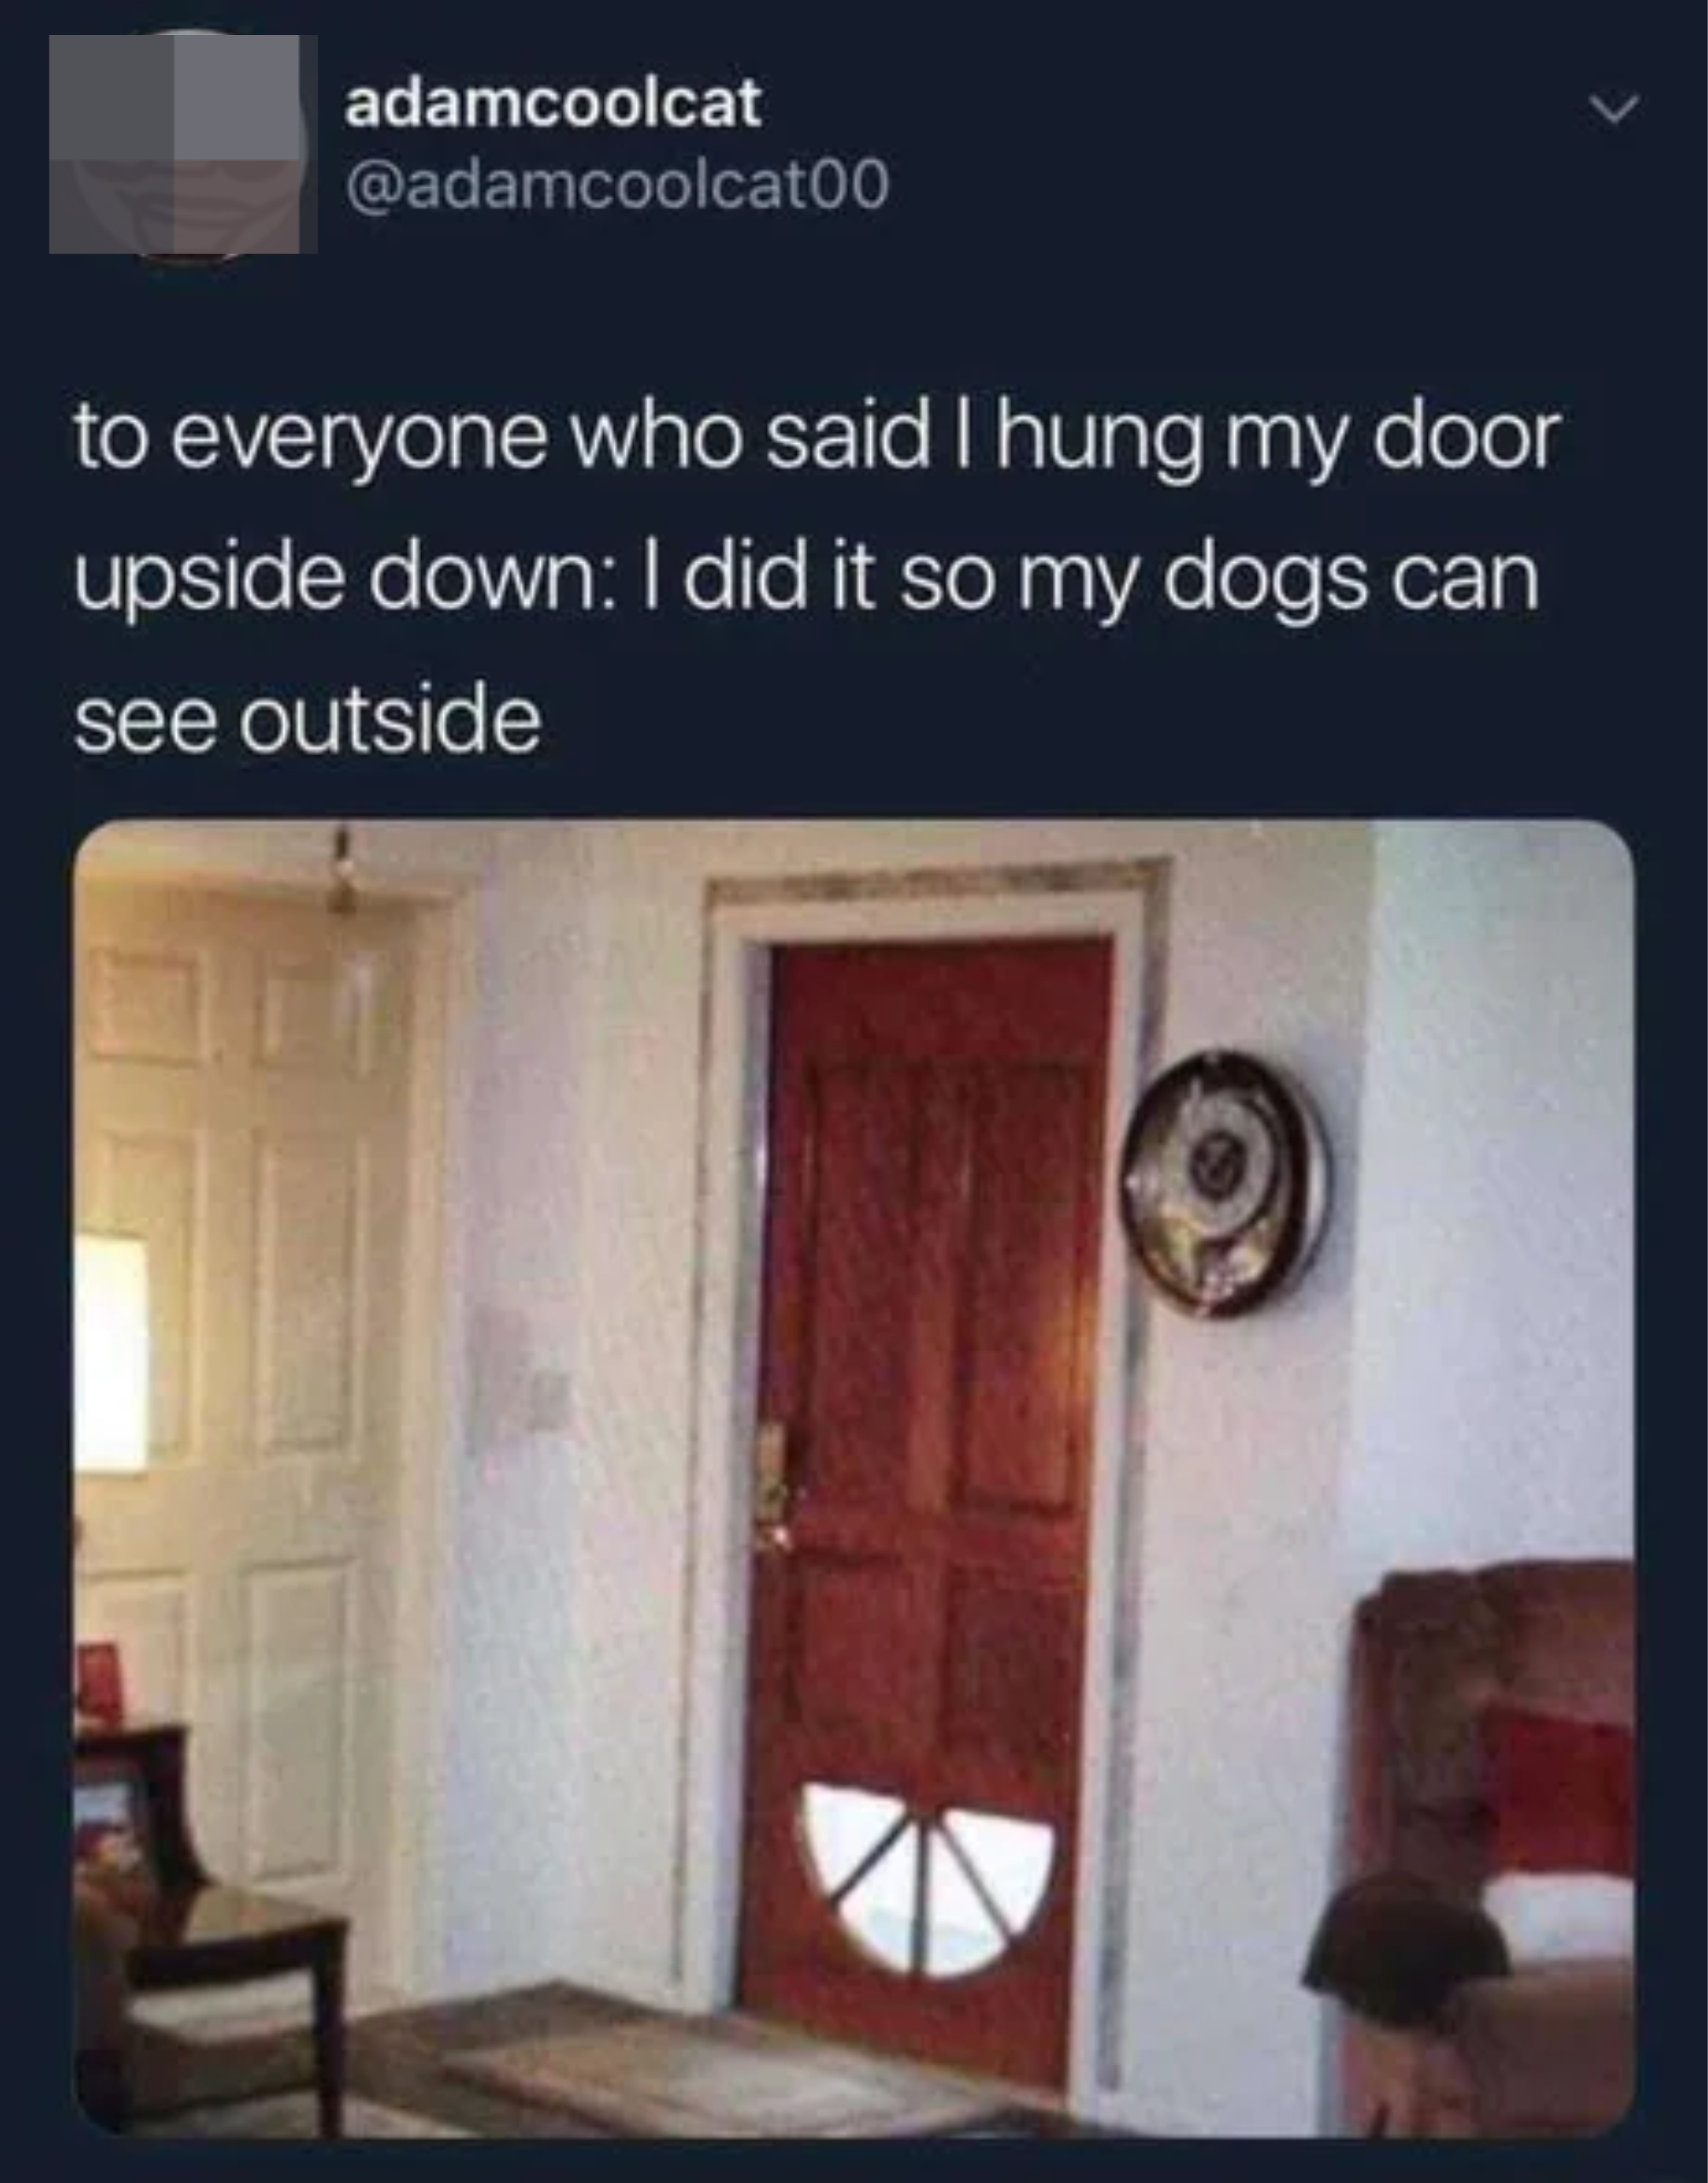 A door with the glass on the bottom, and someone says &quot;to everyone who said I hung my door upside down: I did it so my dogs can see outside&quot;